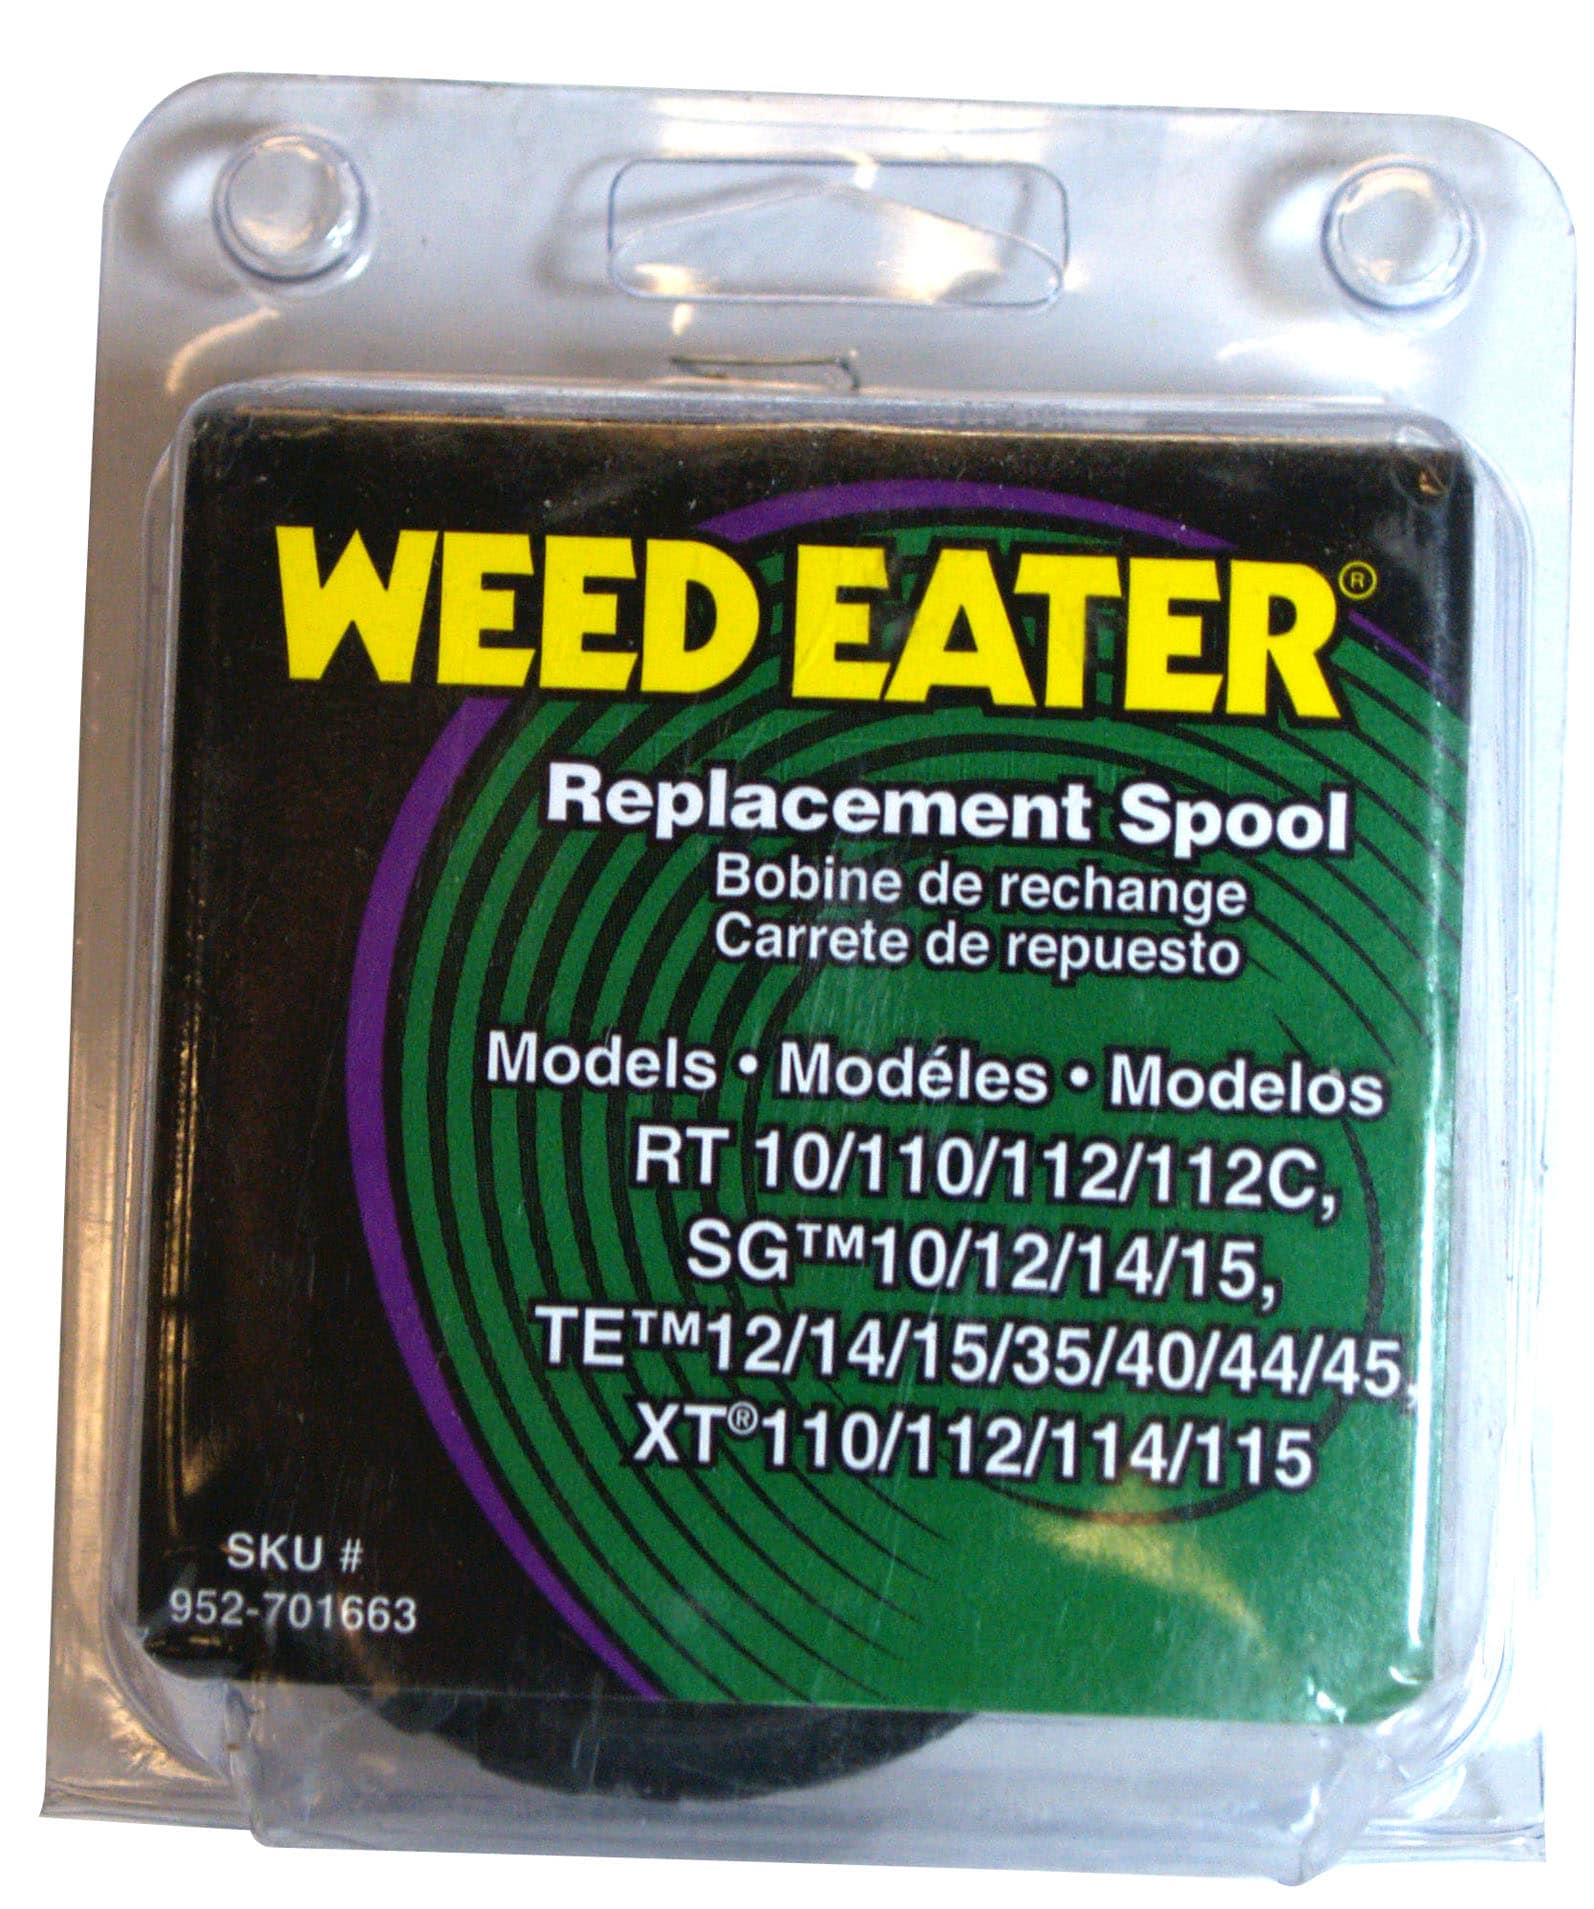 KPYHCCQ CRST String Trimmer Replacement Spool Weed Eater